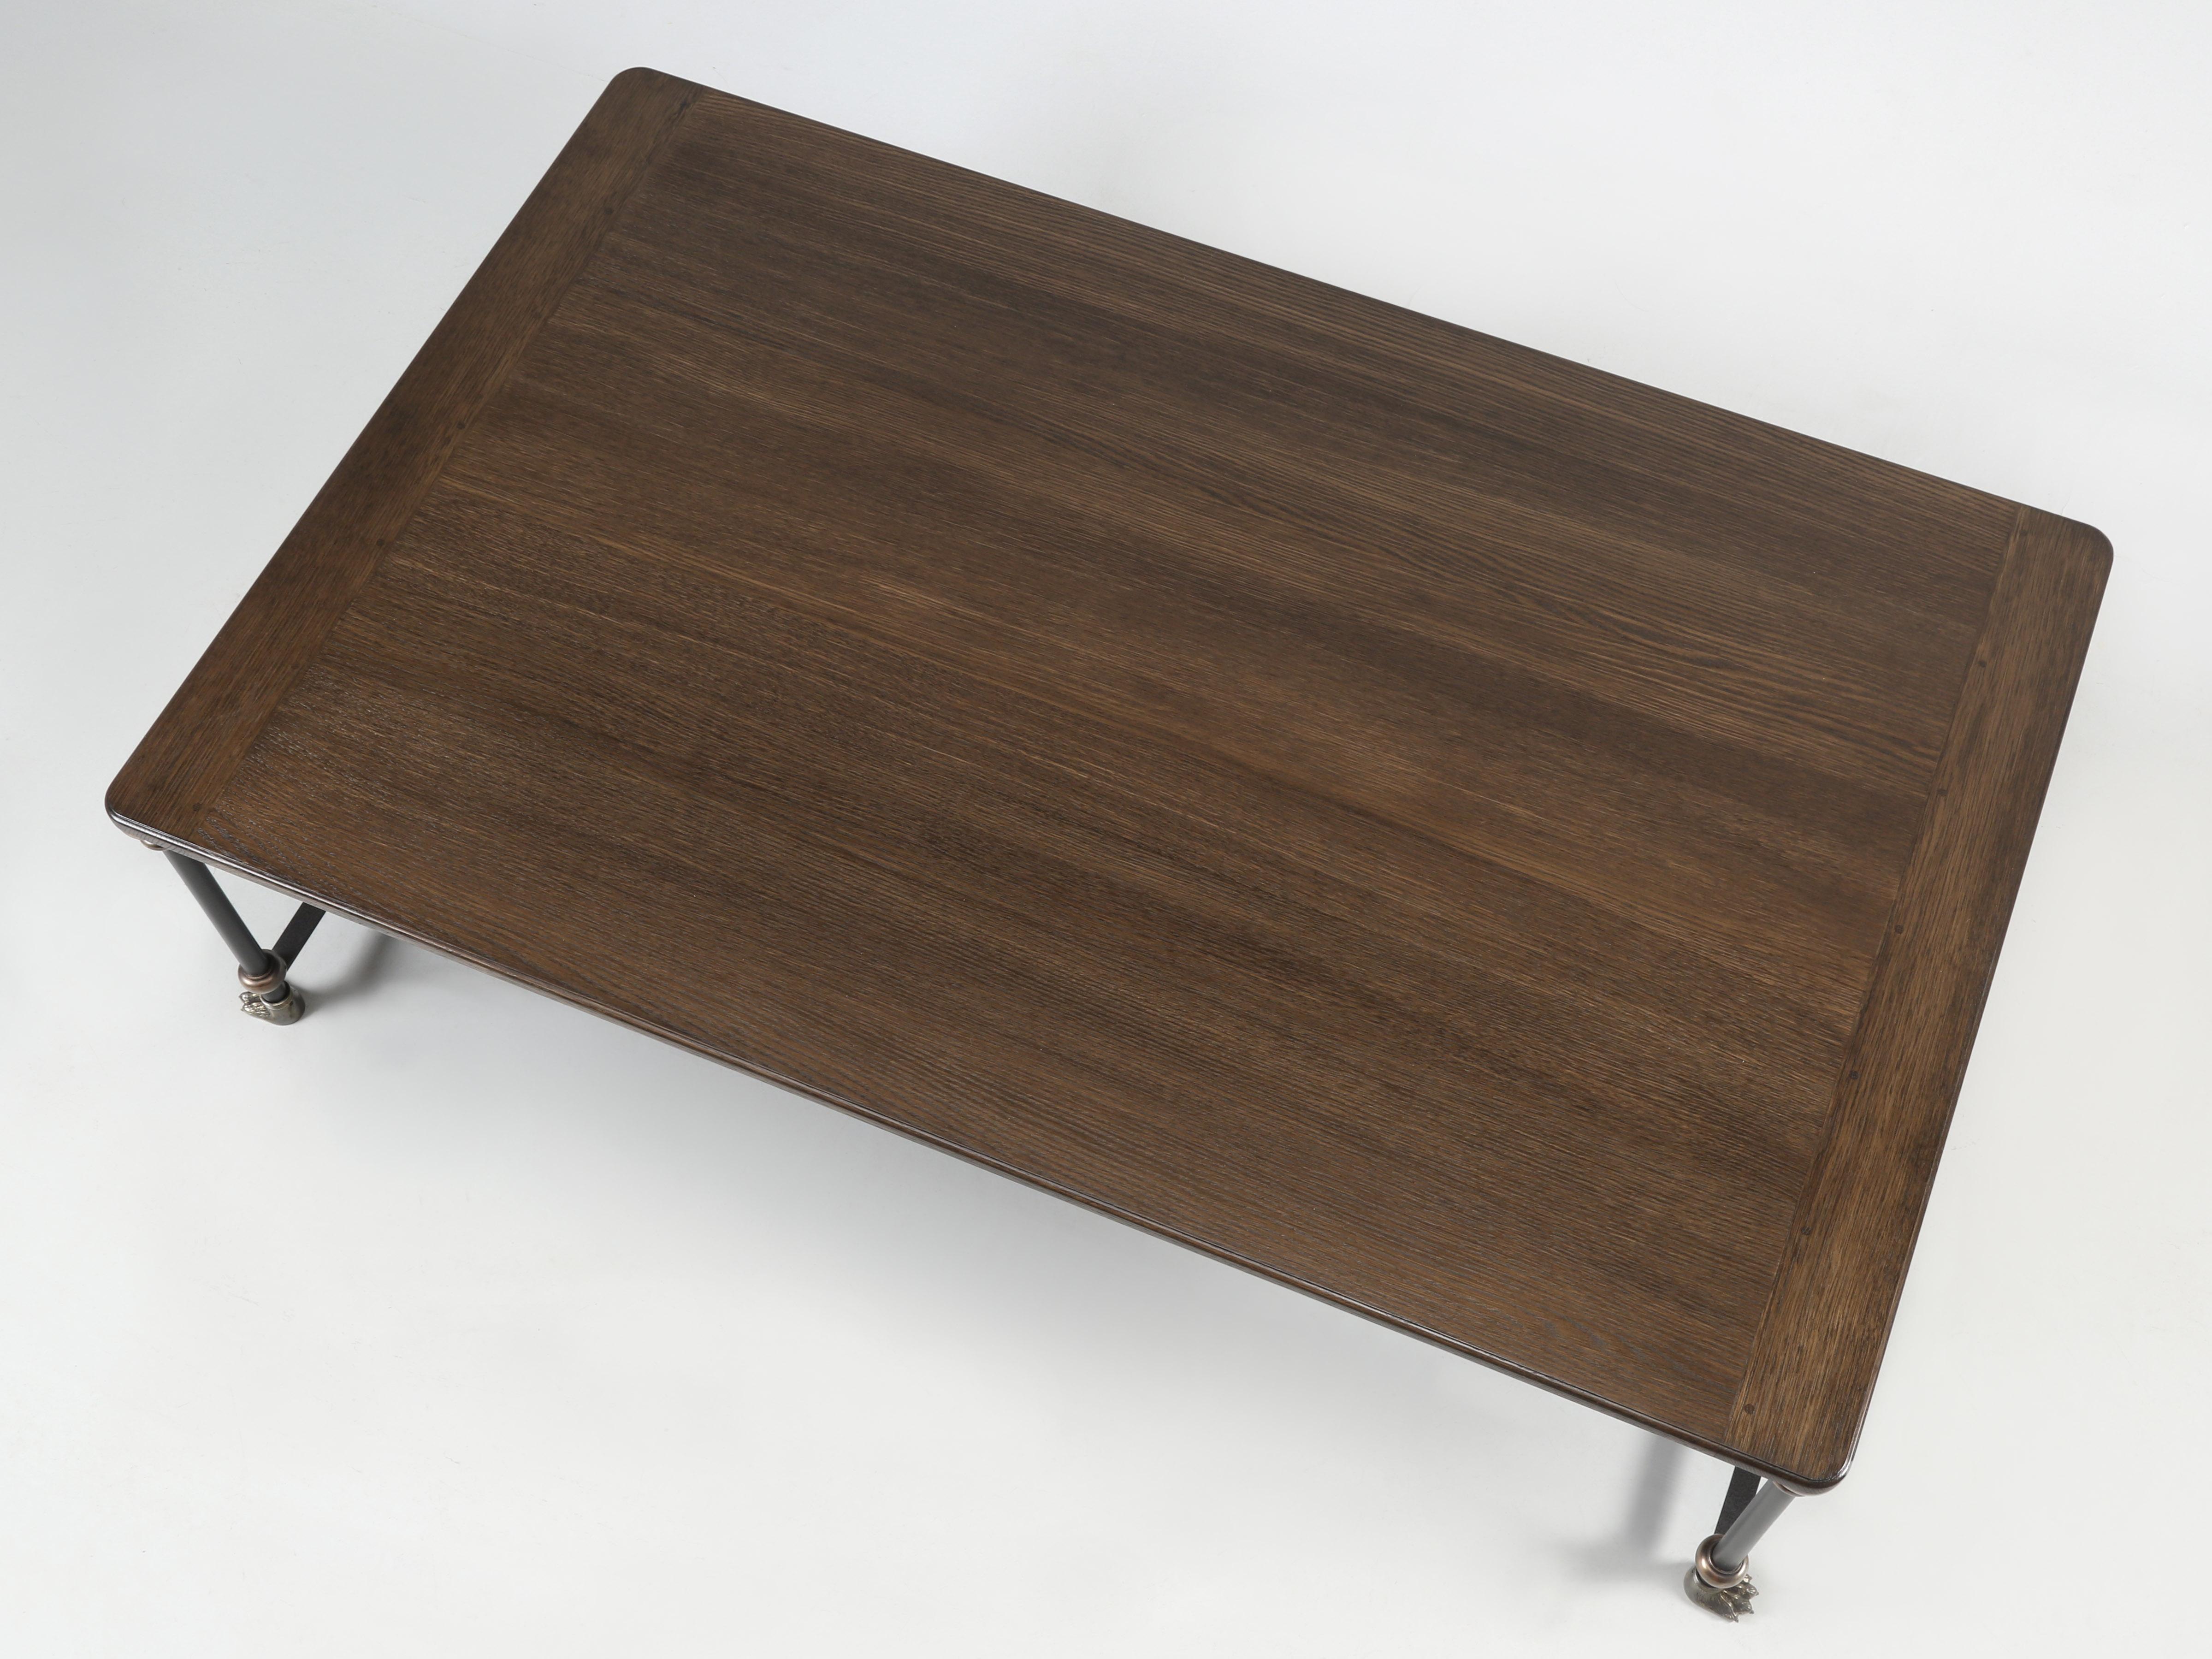 Hand-Crafted Industrial Style Coffee Table Custom Made to Order Oak, Bronze, Brass and Steel For Sale